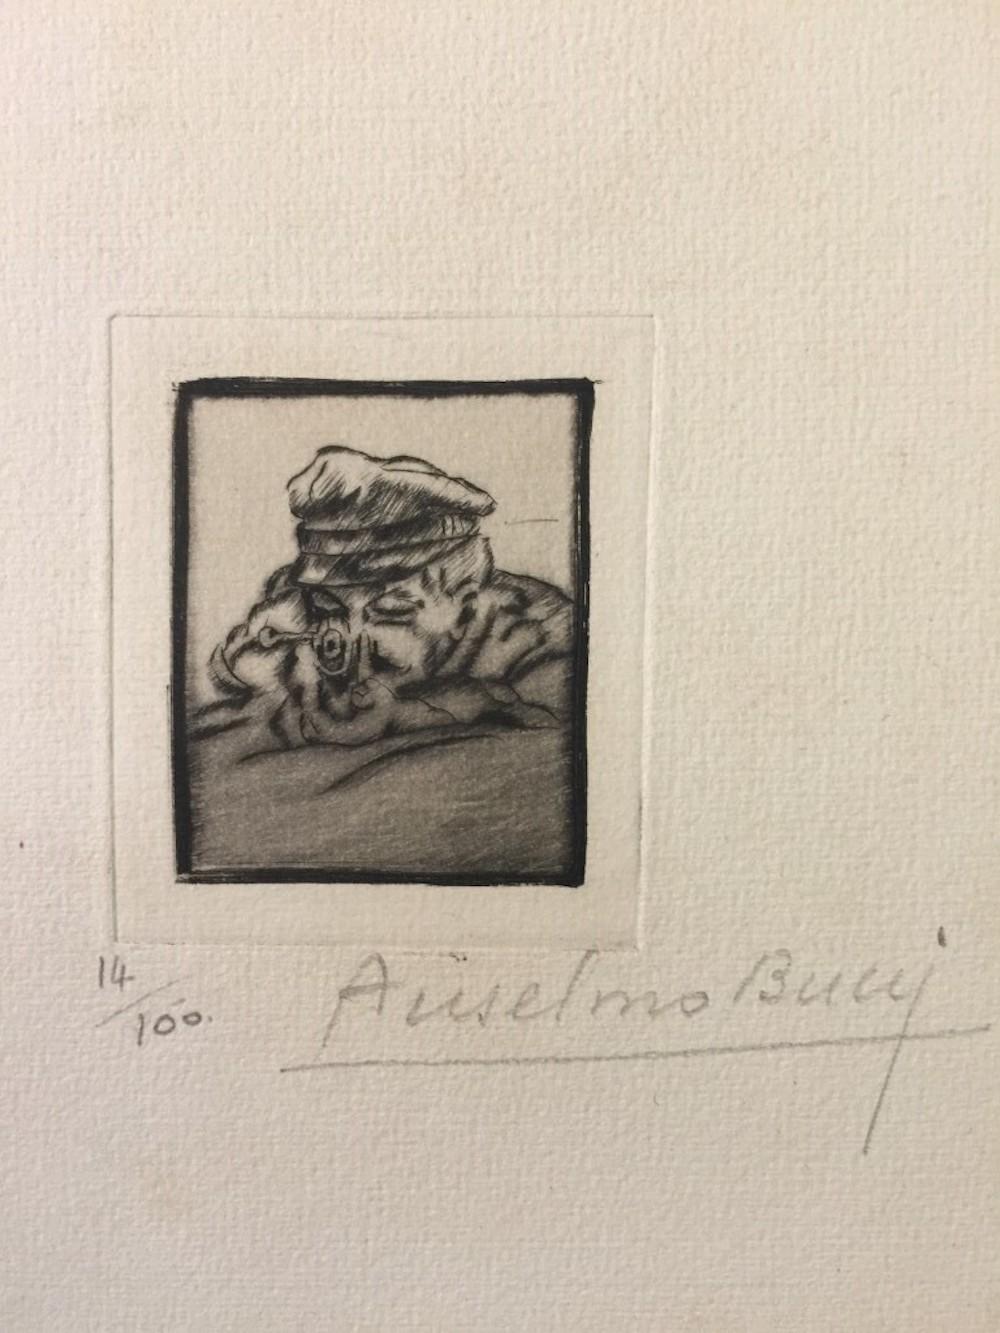 Fusilier - Etching by Anselmo Bucci - 1917